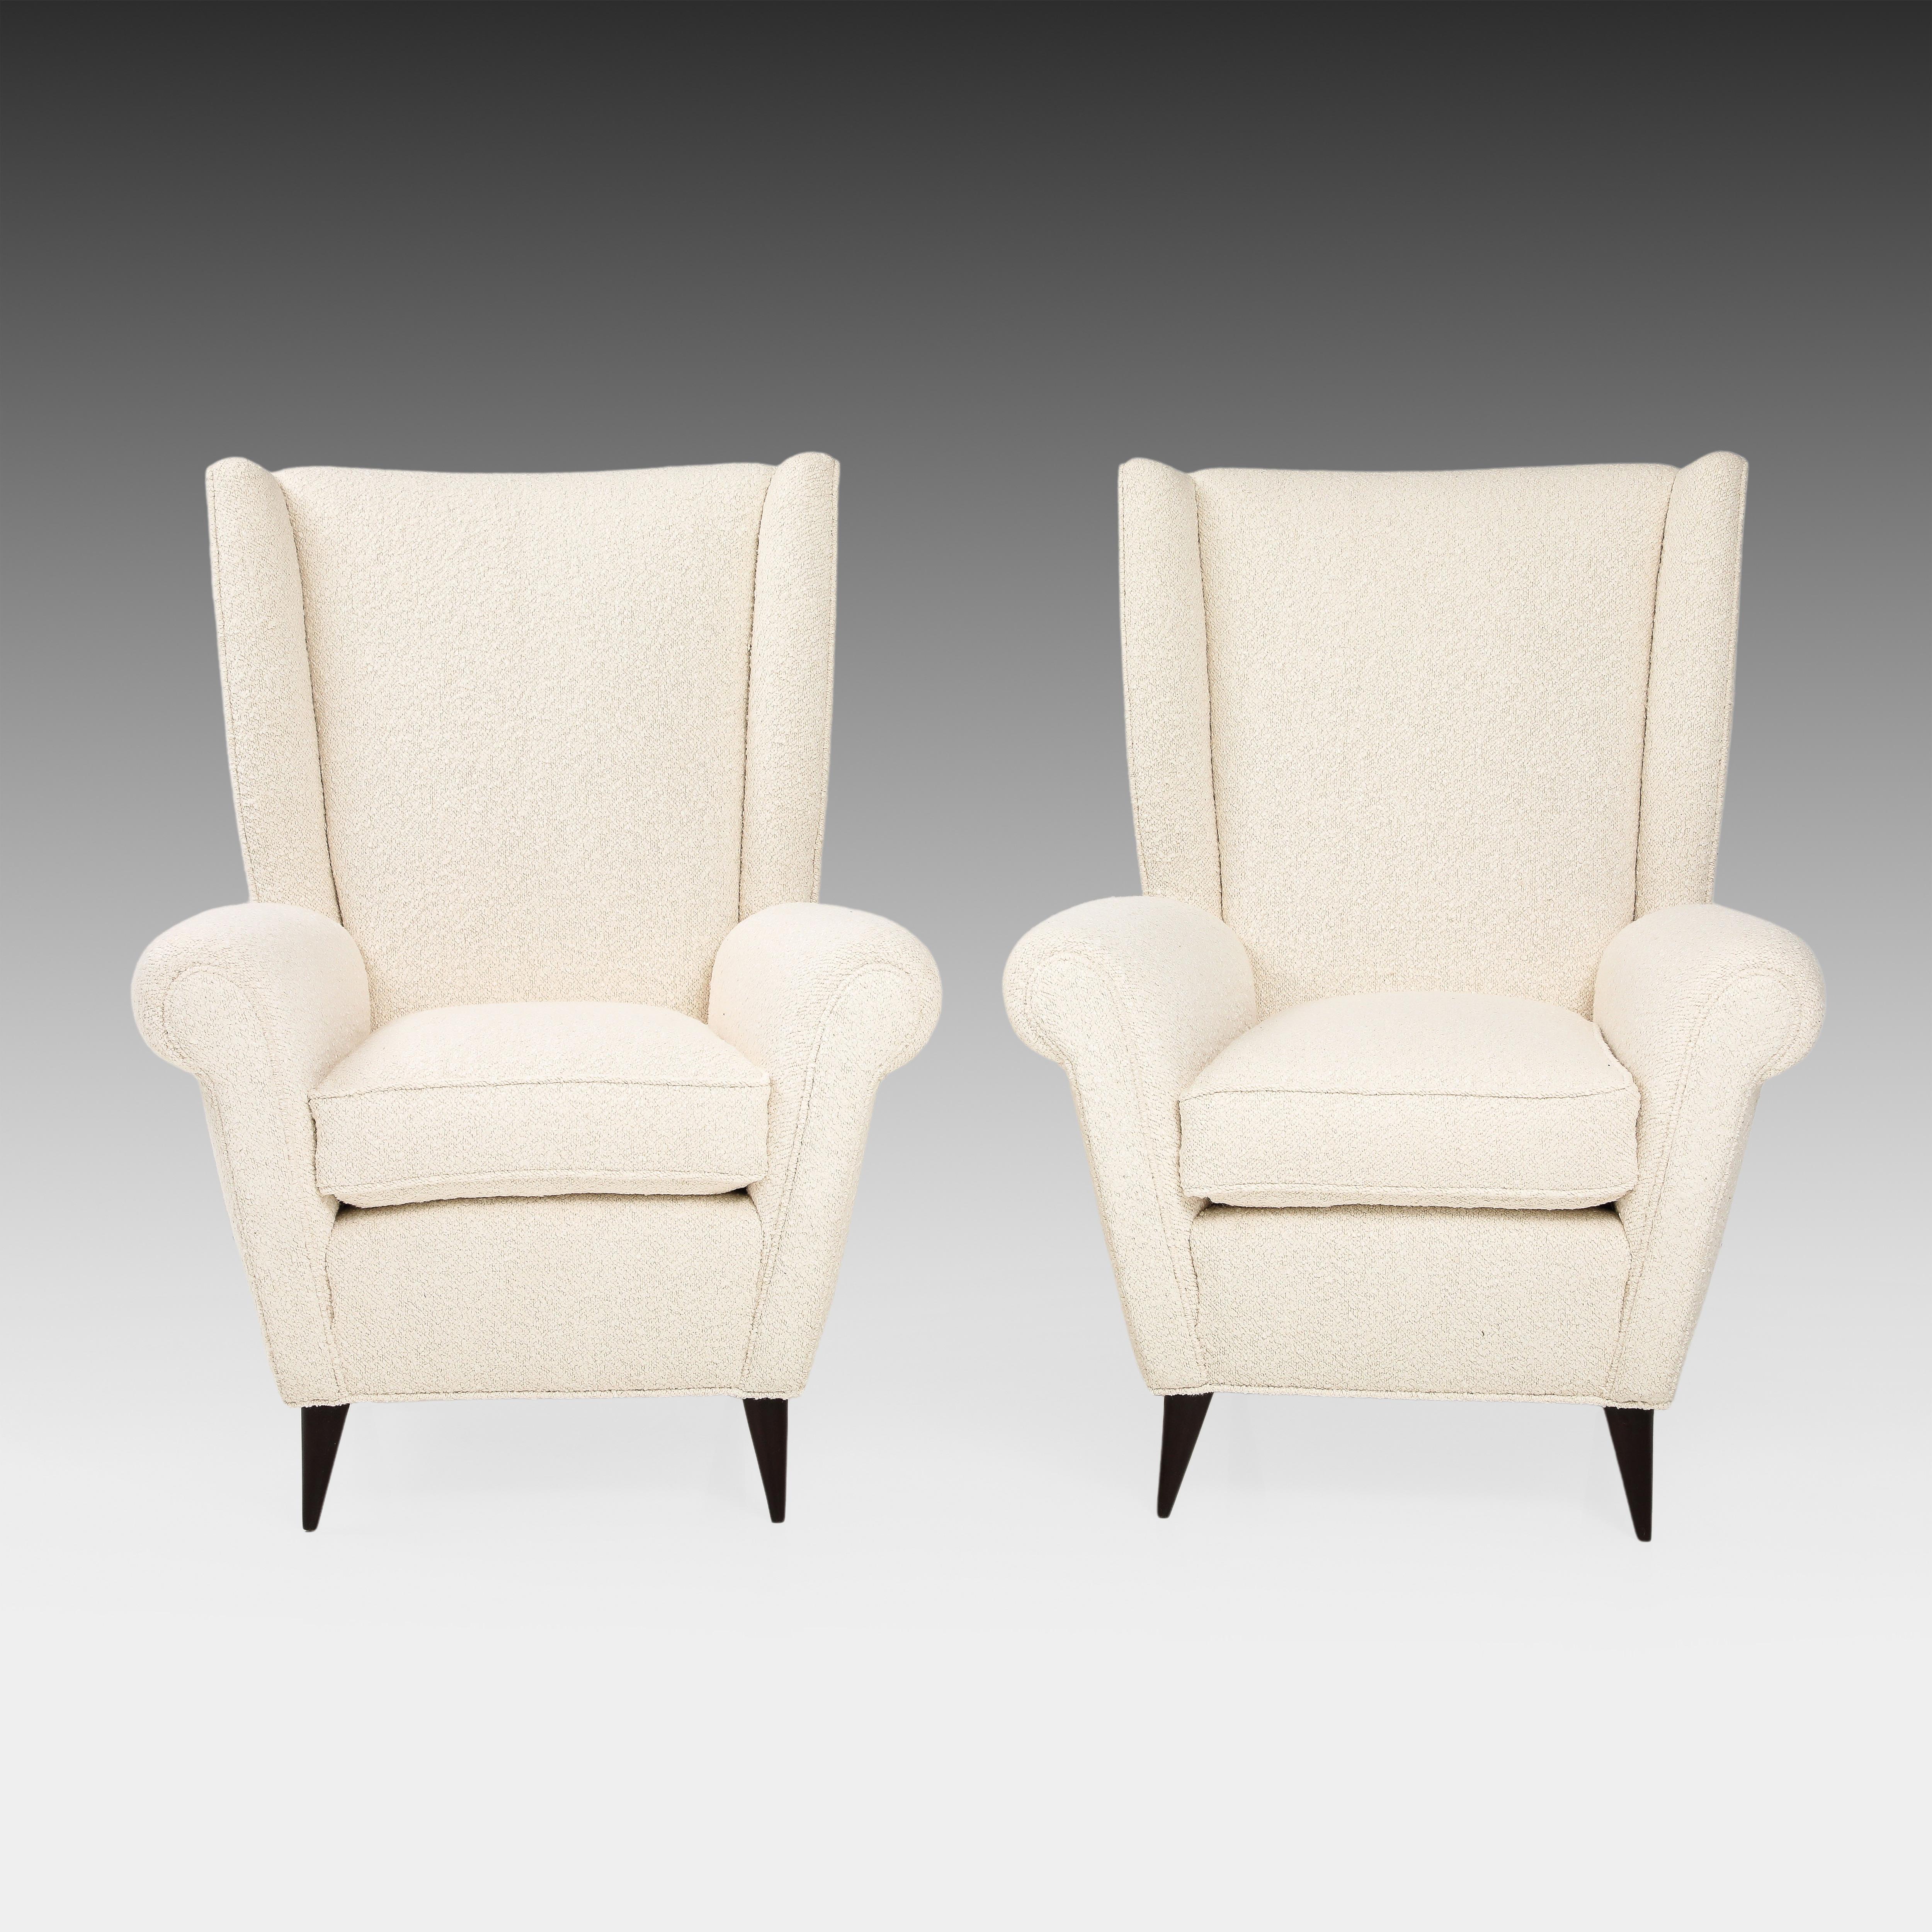 Mid-Century Modern Gio Ponti Pair of High Back Armchairs in Ivory Bouclé, 1950s For Sale